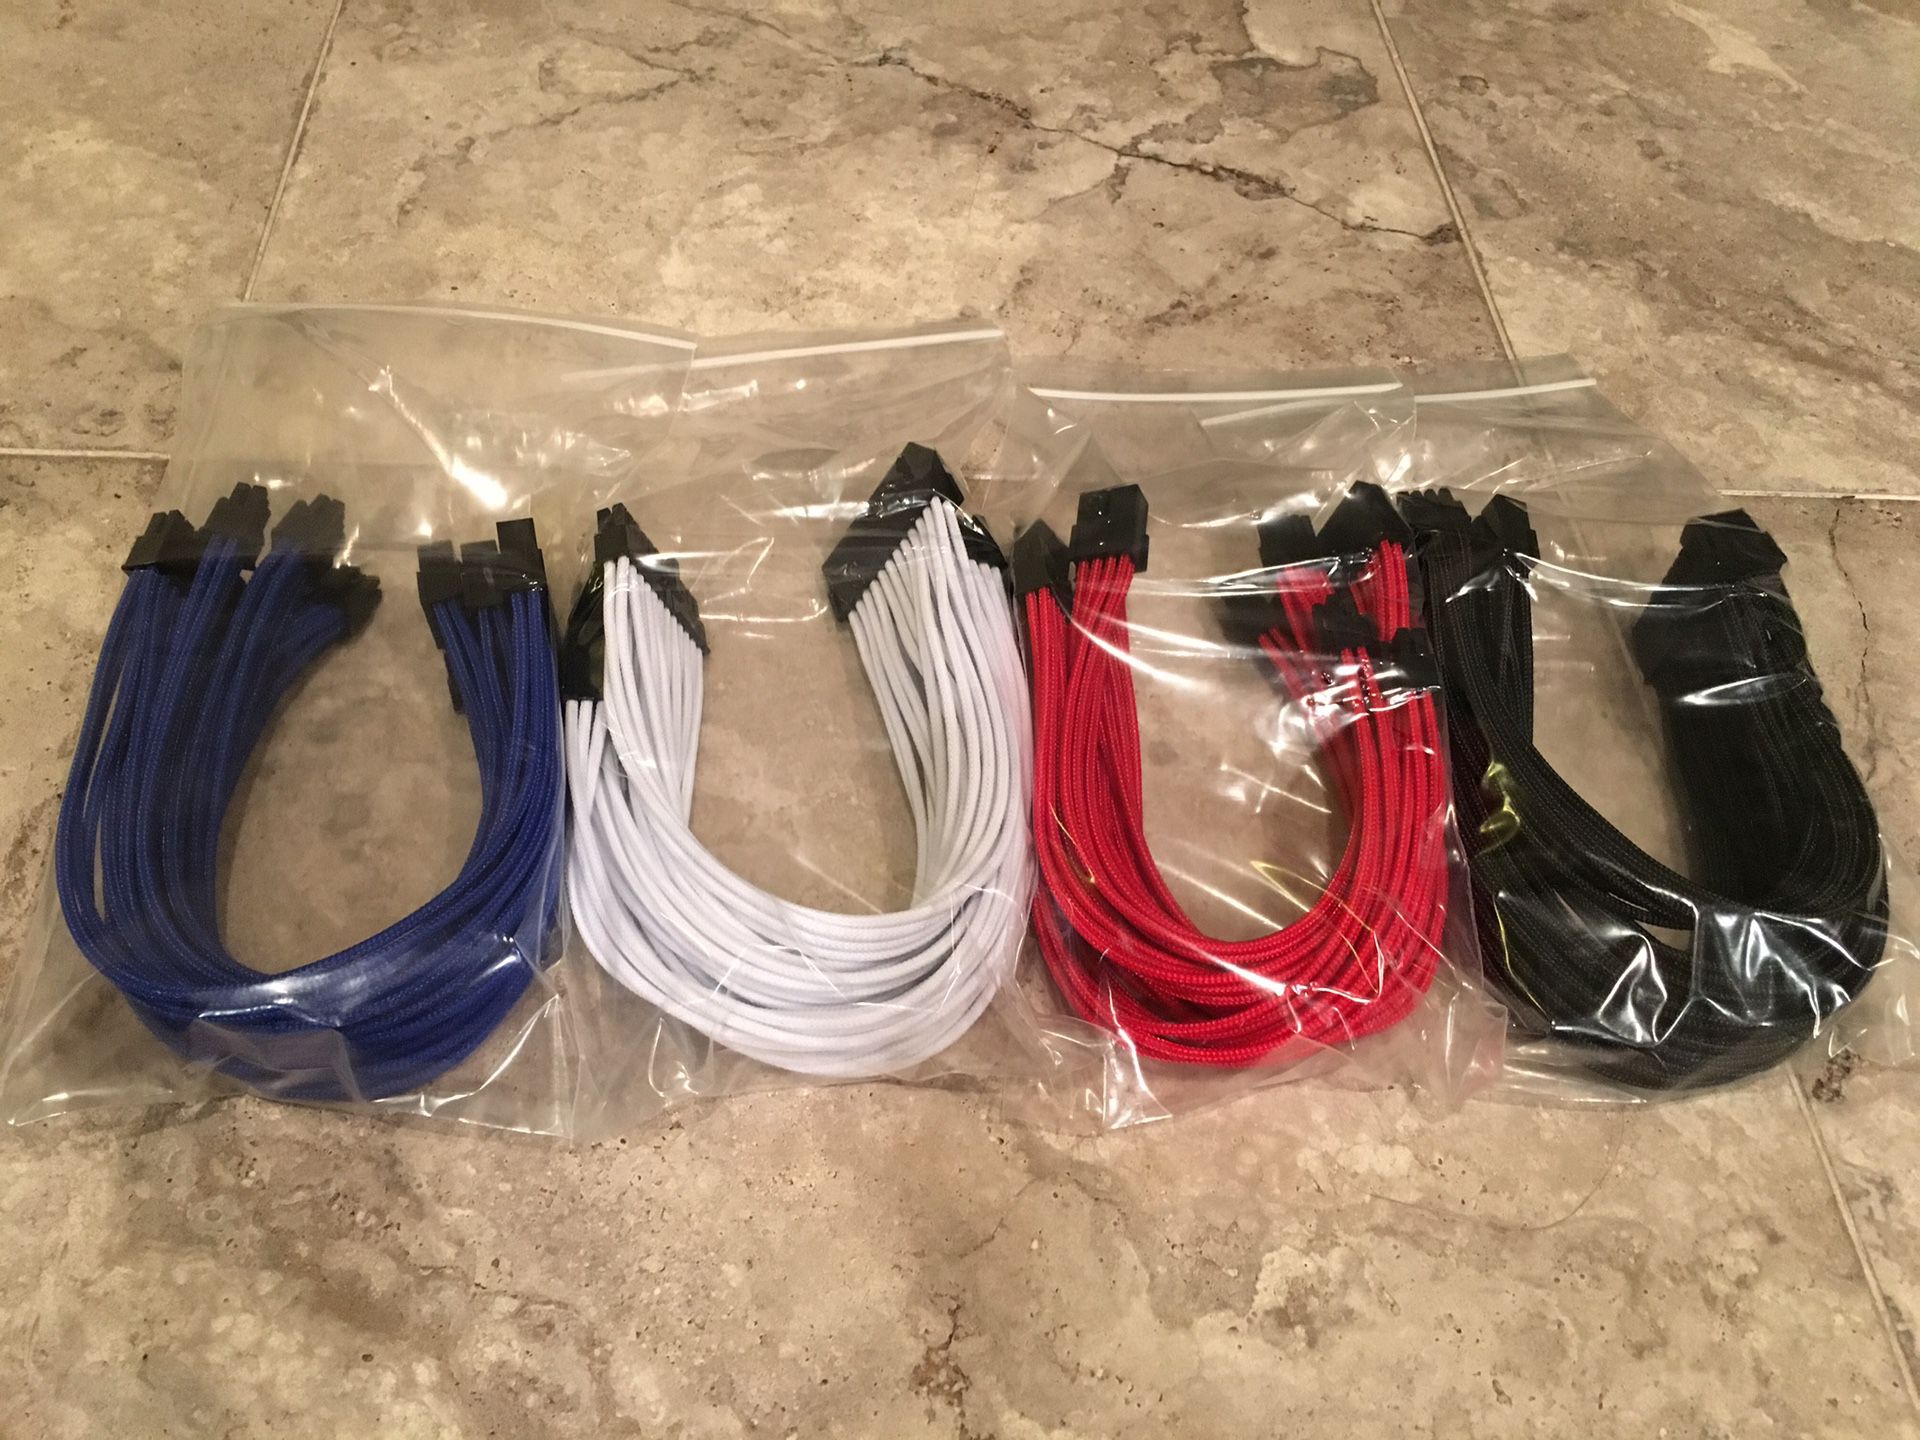 Sleeved cables for PC PSU extensions